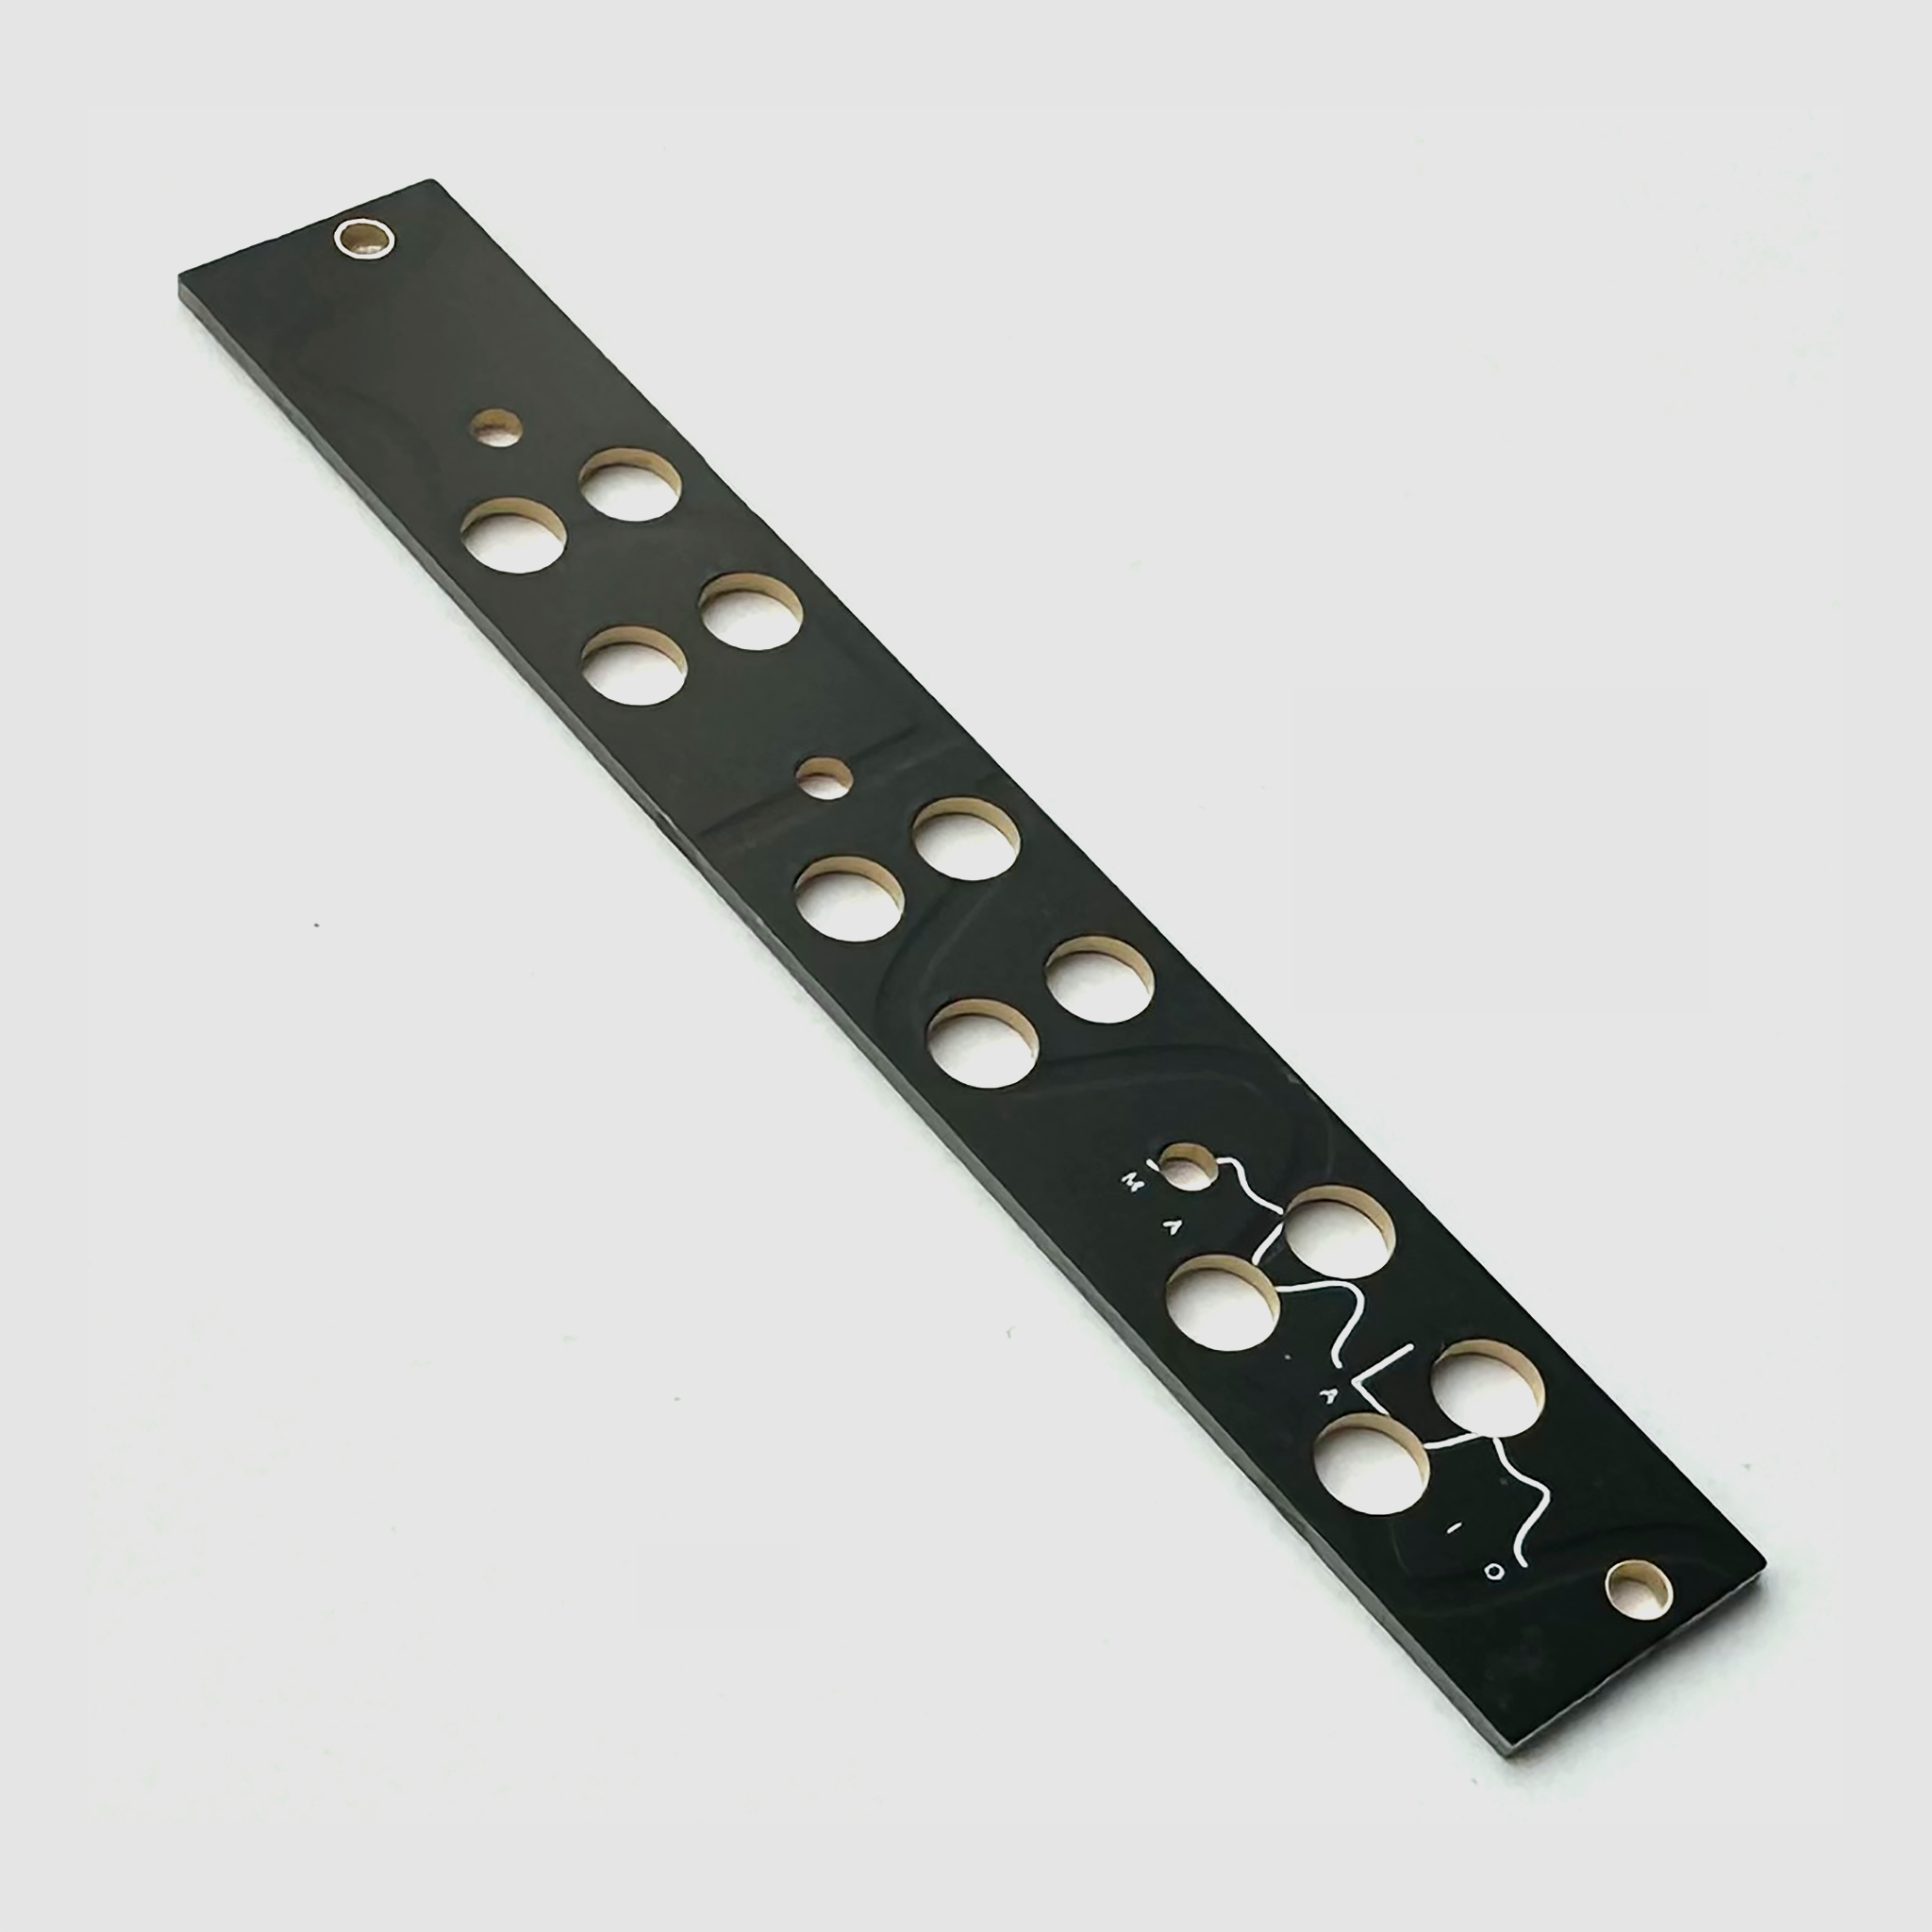 Black panel for Mutable Instruments Links